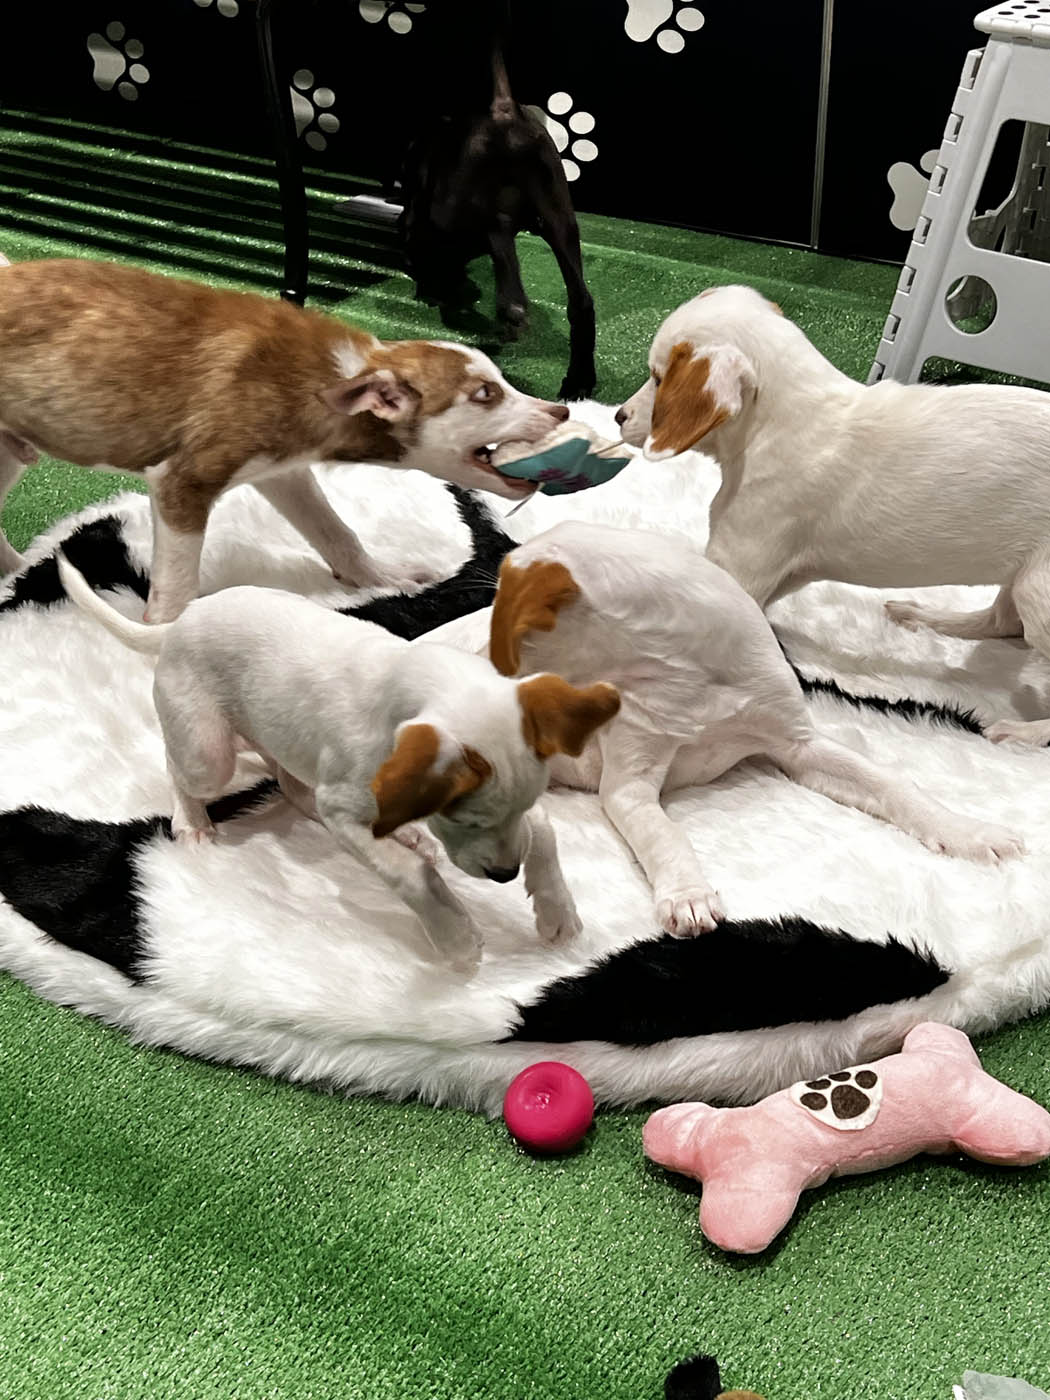 An adorable puppy on a black and white rug at a Puppy Love event.